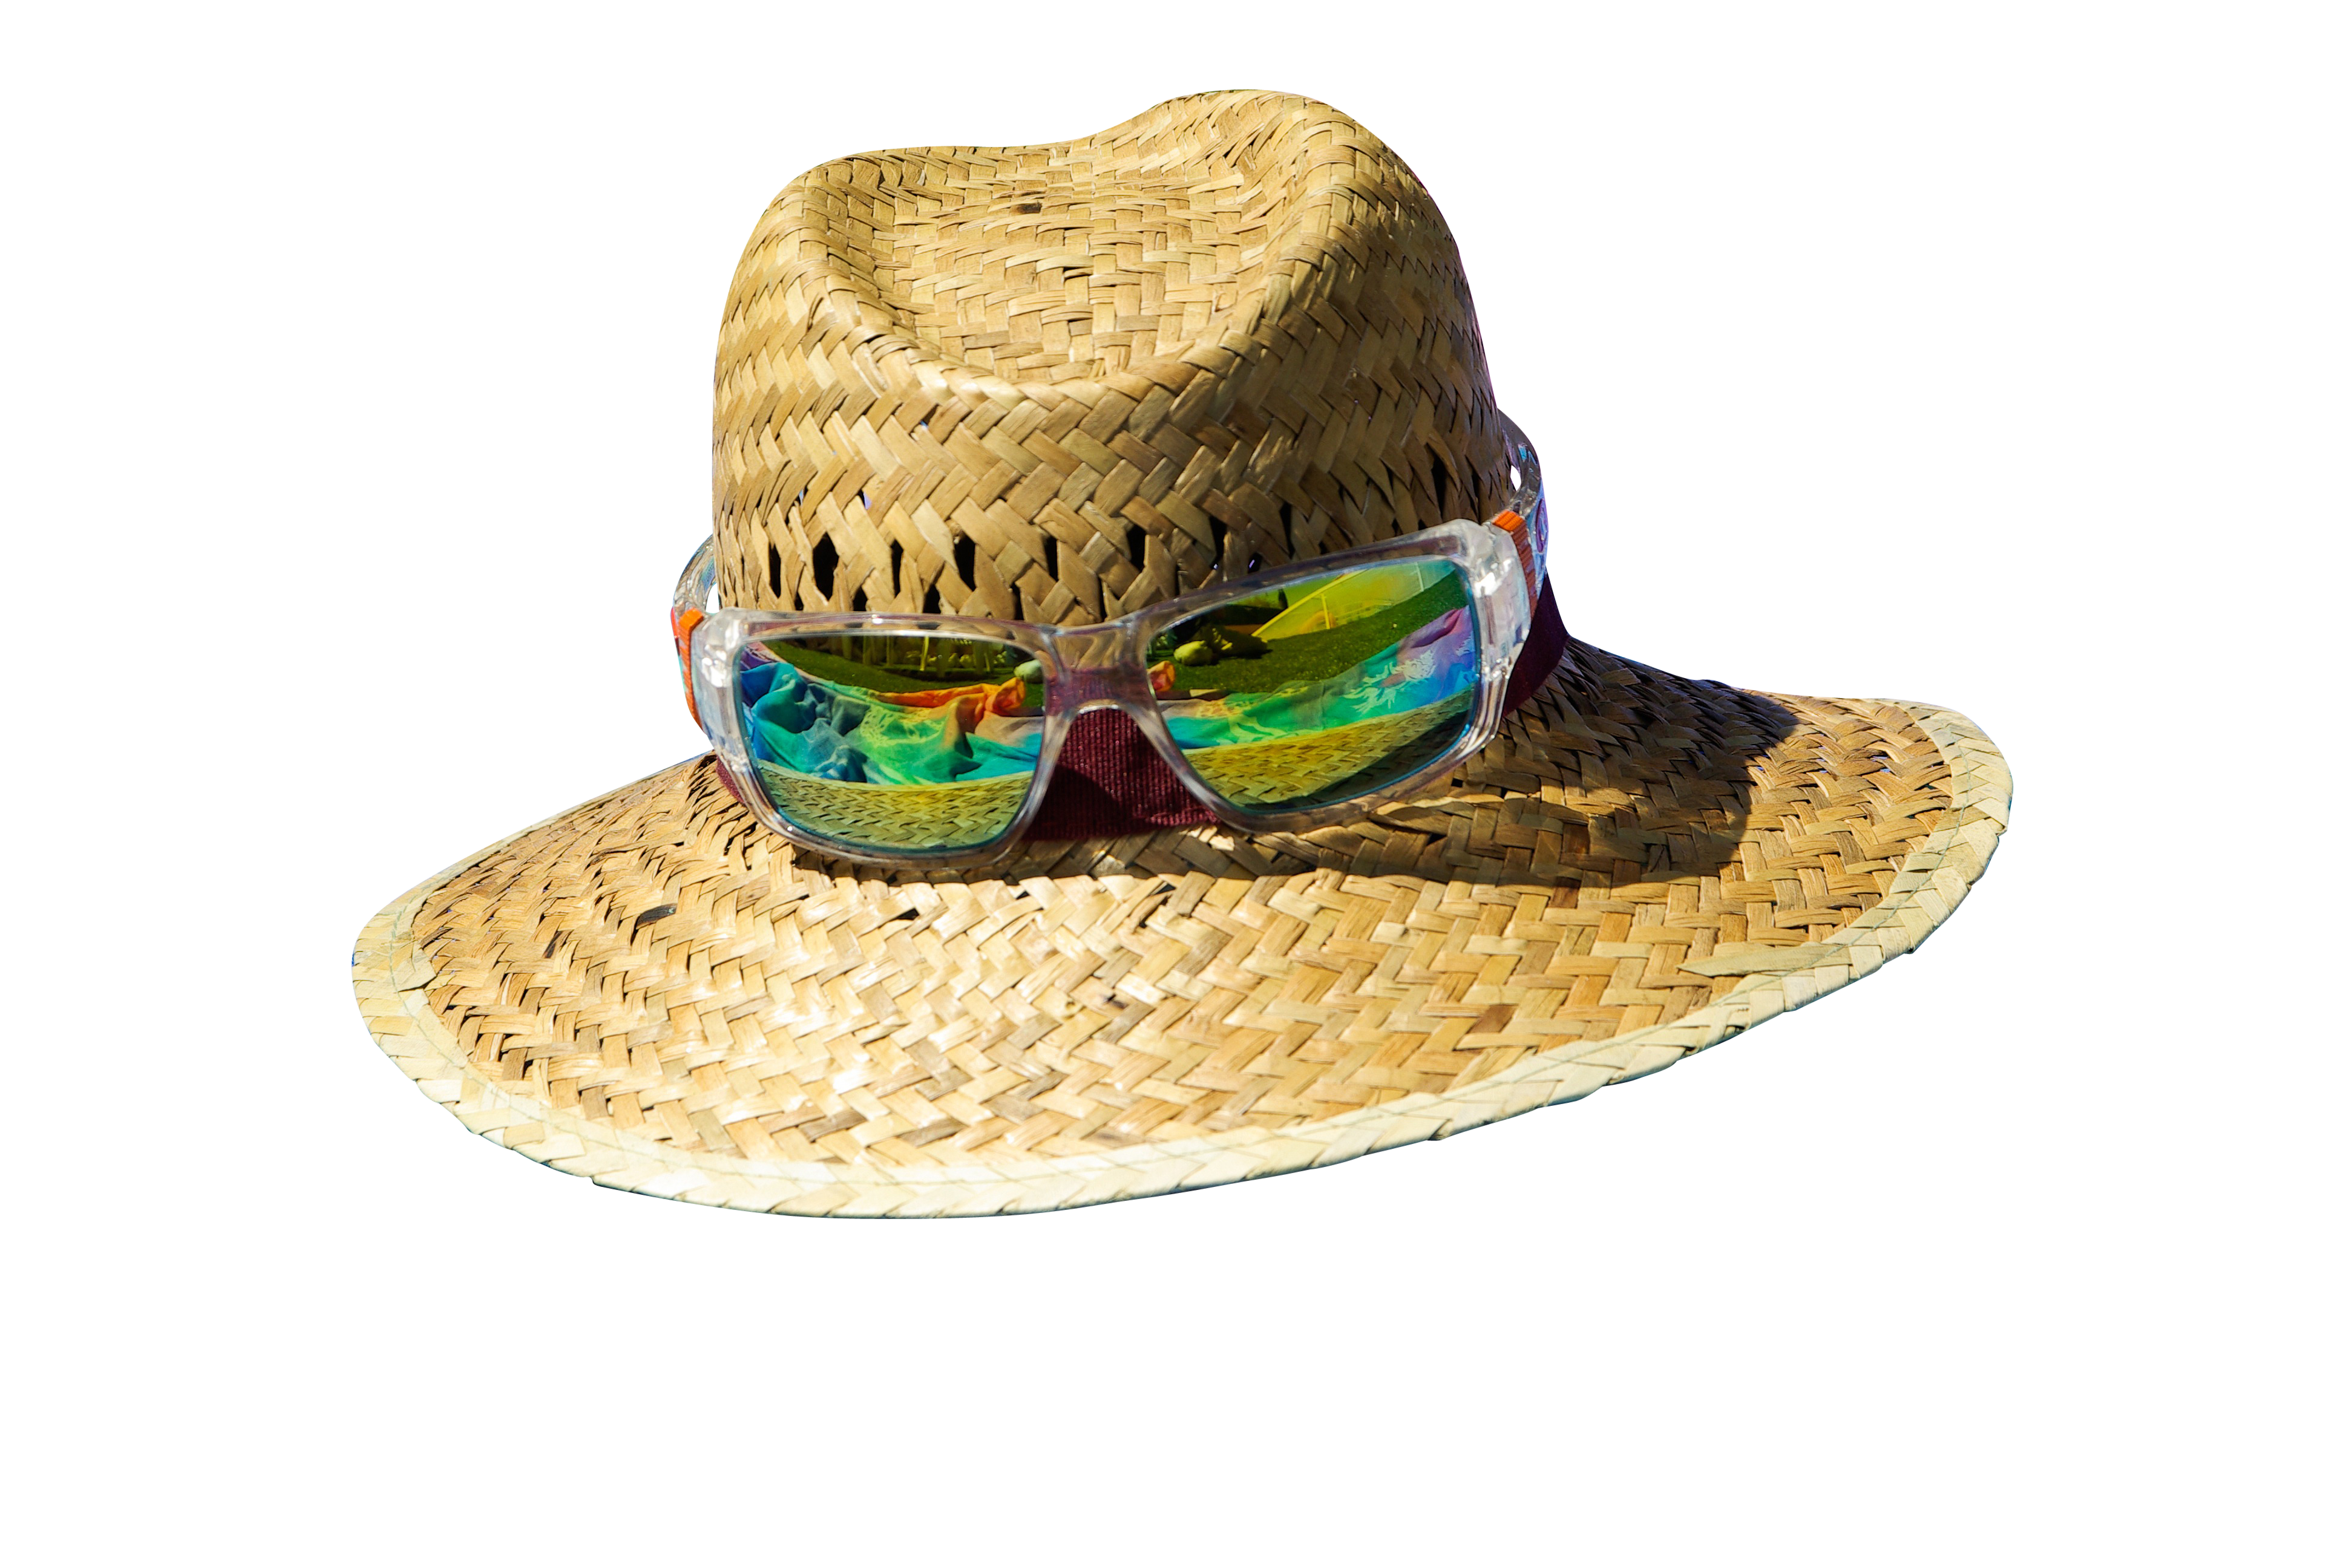 A Straw Hat And Sunglasses